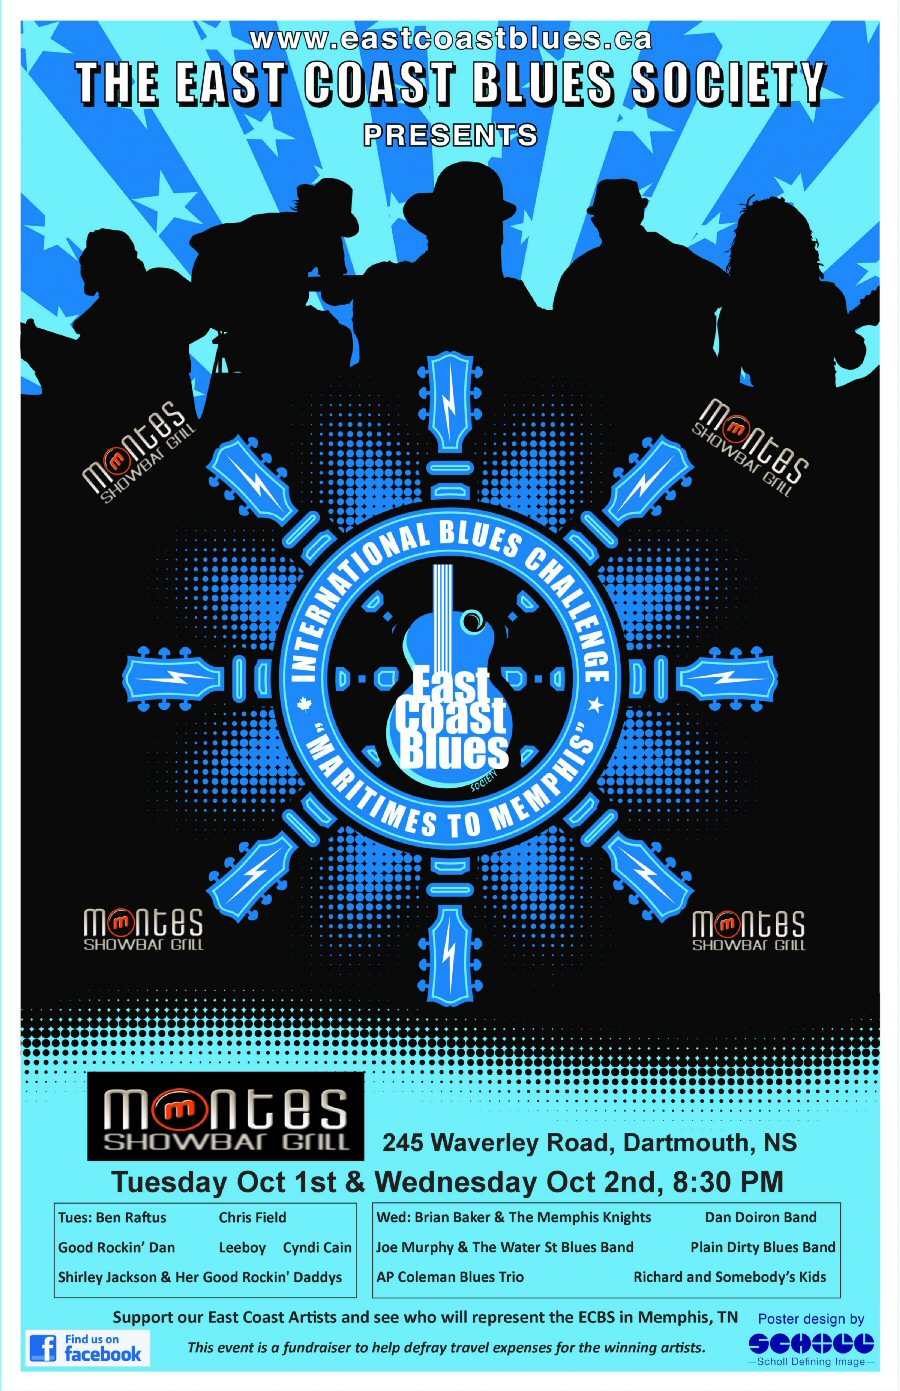 East Coast Blues Society International Blues Challenge competition will be held at Montes Showbar & Grill Tuesday October 1st and Wednesday Octobaer 2nd, 8:30PM